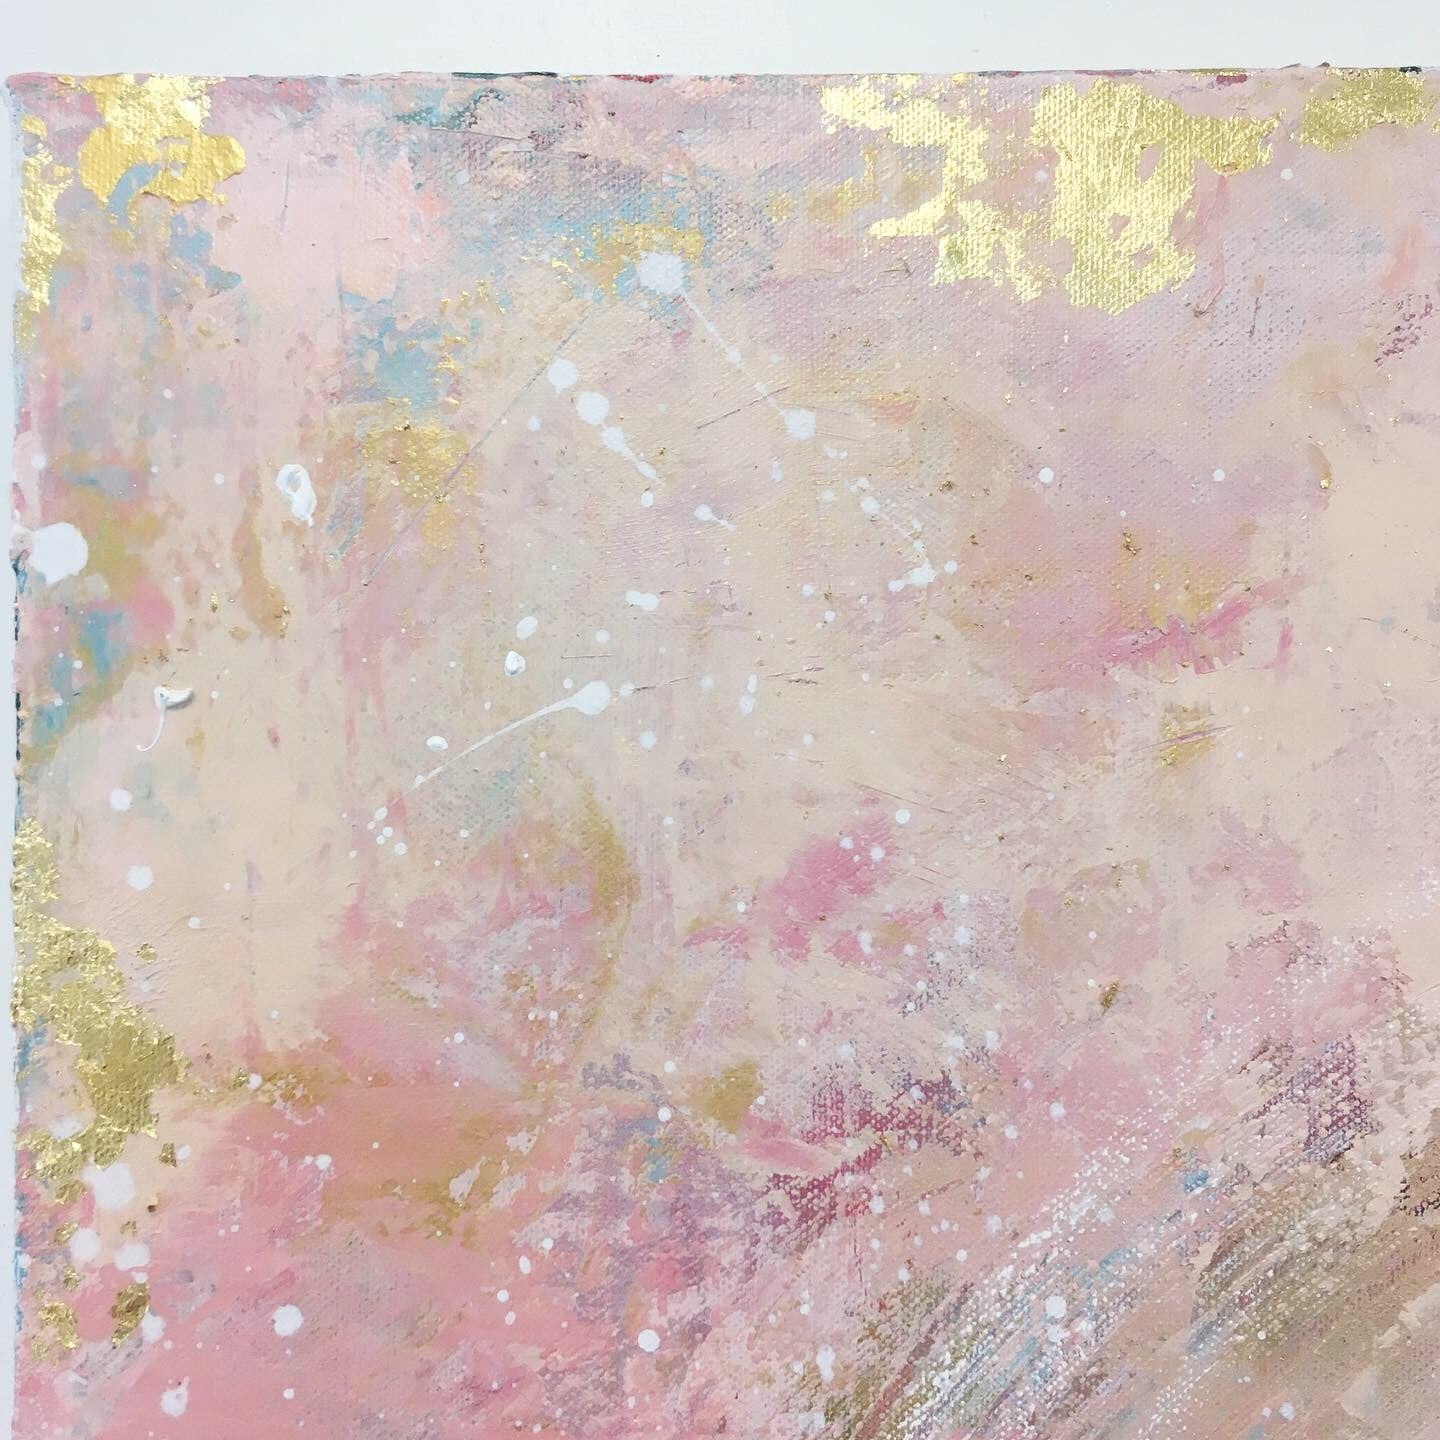 Twilit Inlet abstract painting in pinks & neutrals